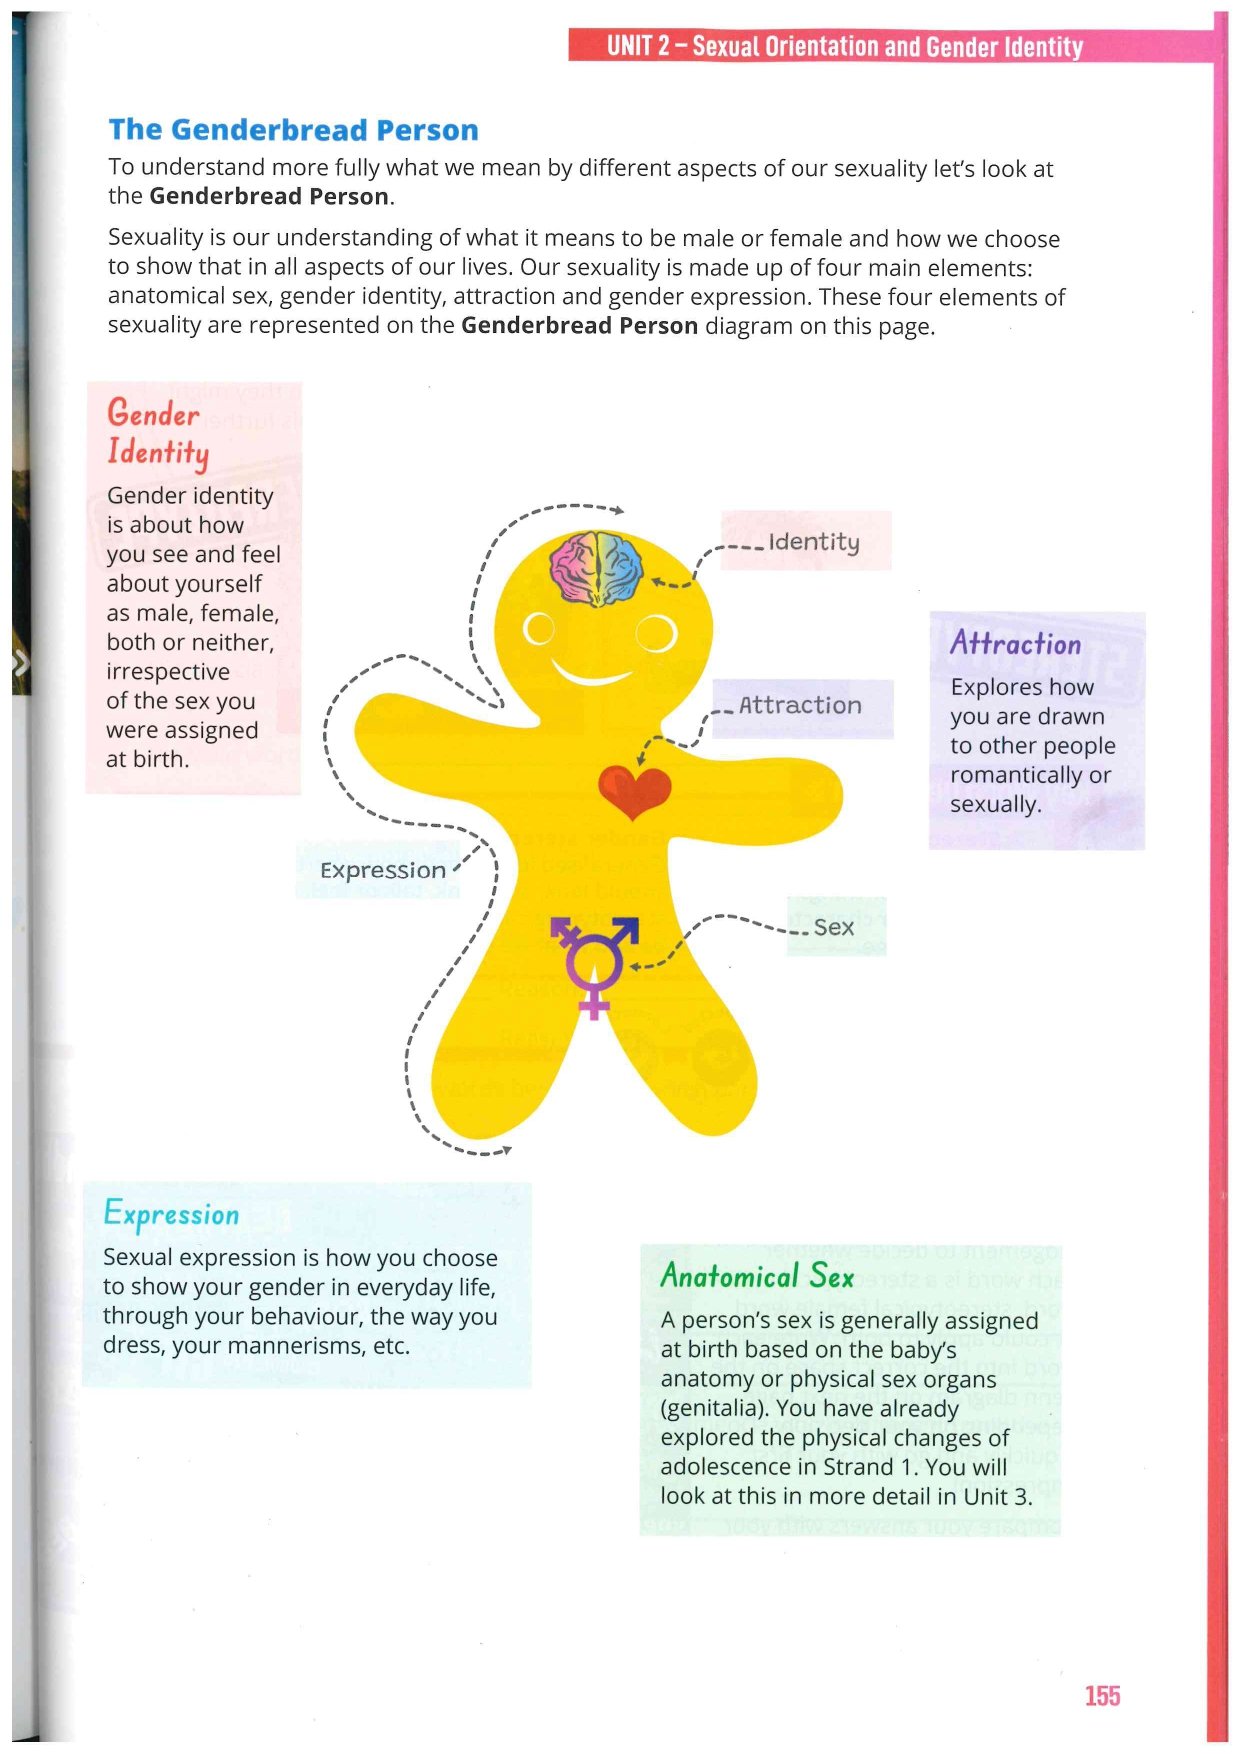 SPHE Textbook EdCo - Strand 3 Relationships and Sexuality for 1st yrs - Health and Wellbeing SPHE 1 2023_pages-to-jpg-0002.jpg